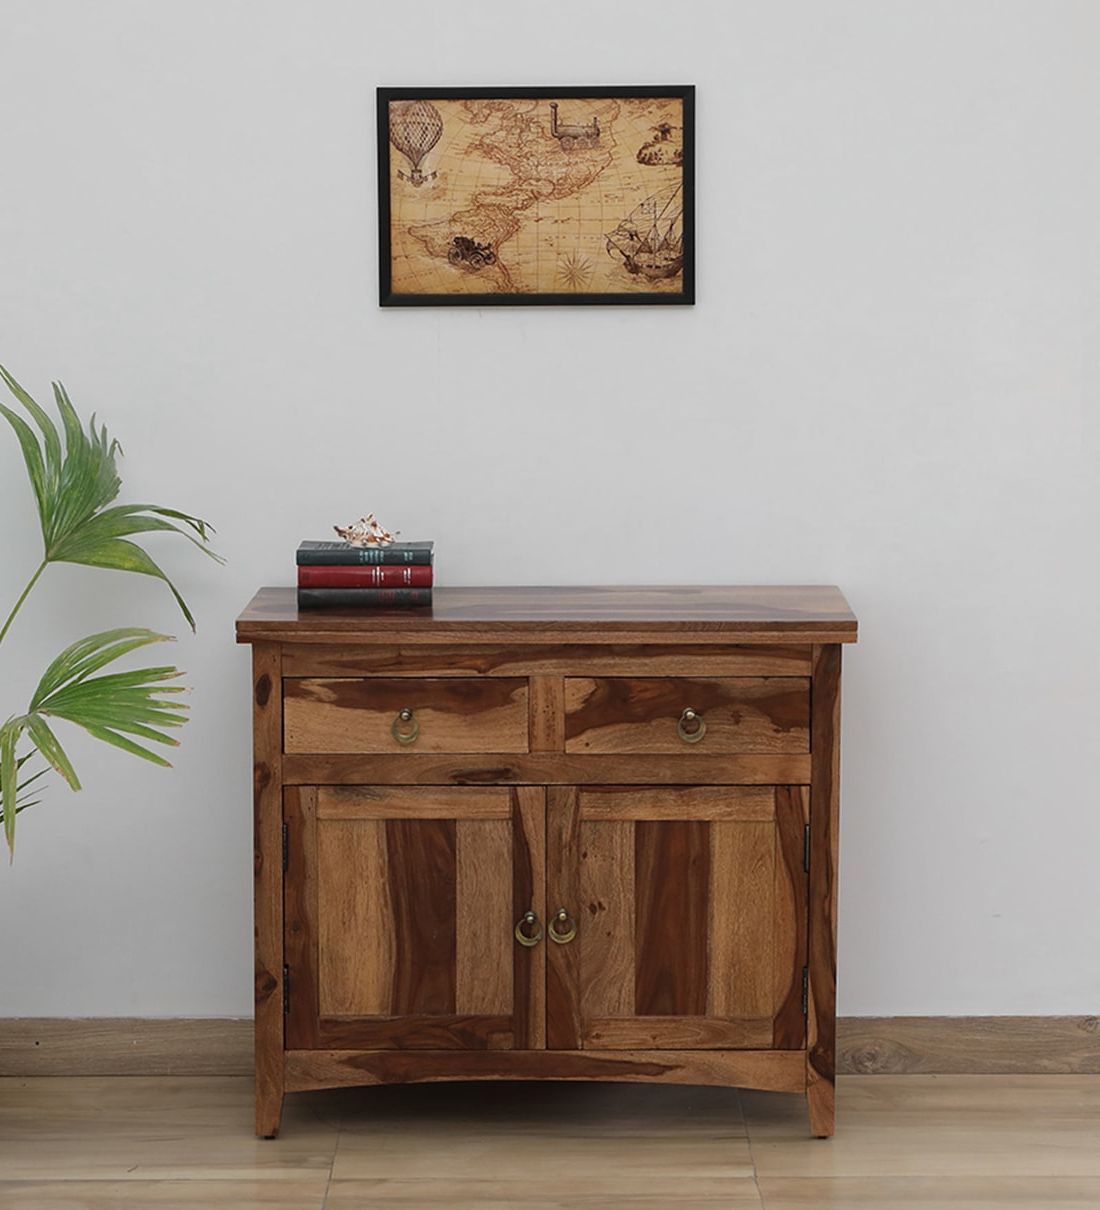 [%buy Biscay Sheesham Wood Sideboard In Scratch Resistant Rustic Teak Finish  At 2% Offwoodsworth From Pepperfry | Pepperfry Within Newest Brown Finished Wood Sideboards|brown Finished Wood Sideboards Regarding Best And Newest Buy Biscay Sheesham Wood Sideboard In Scratch Resistant Rustic Teak Finish  At 2% Offwoodsworth From Pepperfry | Pepperfry|preferred Brown Finished Wood Sideboards With Regard To Buy Biscay Sheesham Wood Sideboard In Scratch Resistant Rustic Teak Finish  At 2% Offwoodsworth From Pepperfry | Pepperfry|well Known Buy Biscay Sheesham Wood Sideboard In Scratch Resistant Rustic Teak Finish  At 2% Offwoodsworth From Pepperfry | Pepperfry For Brown Finished Wood Sideboards%] (Photo 7 of 10)